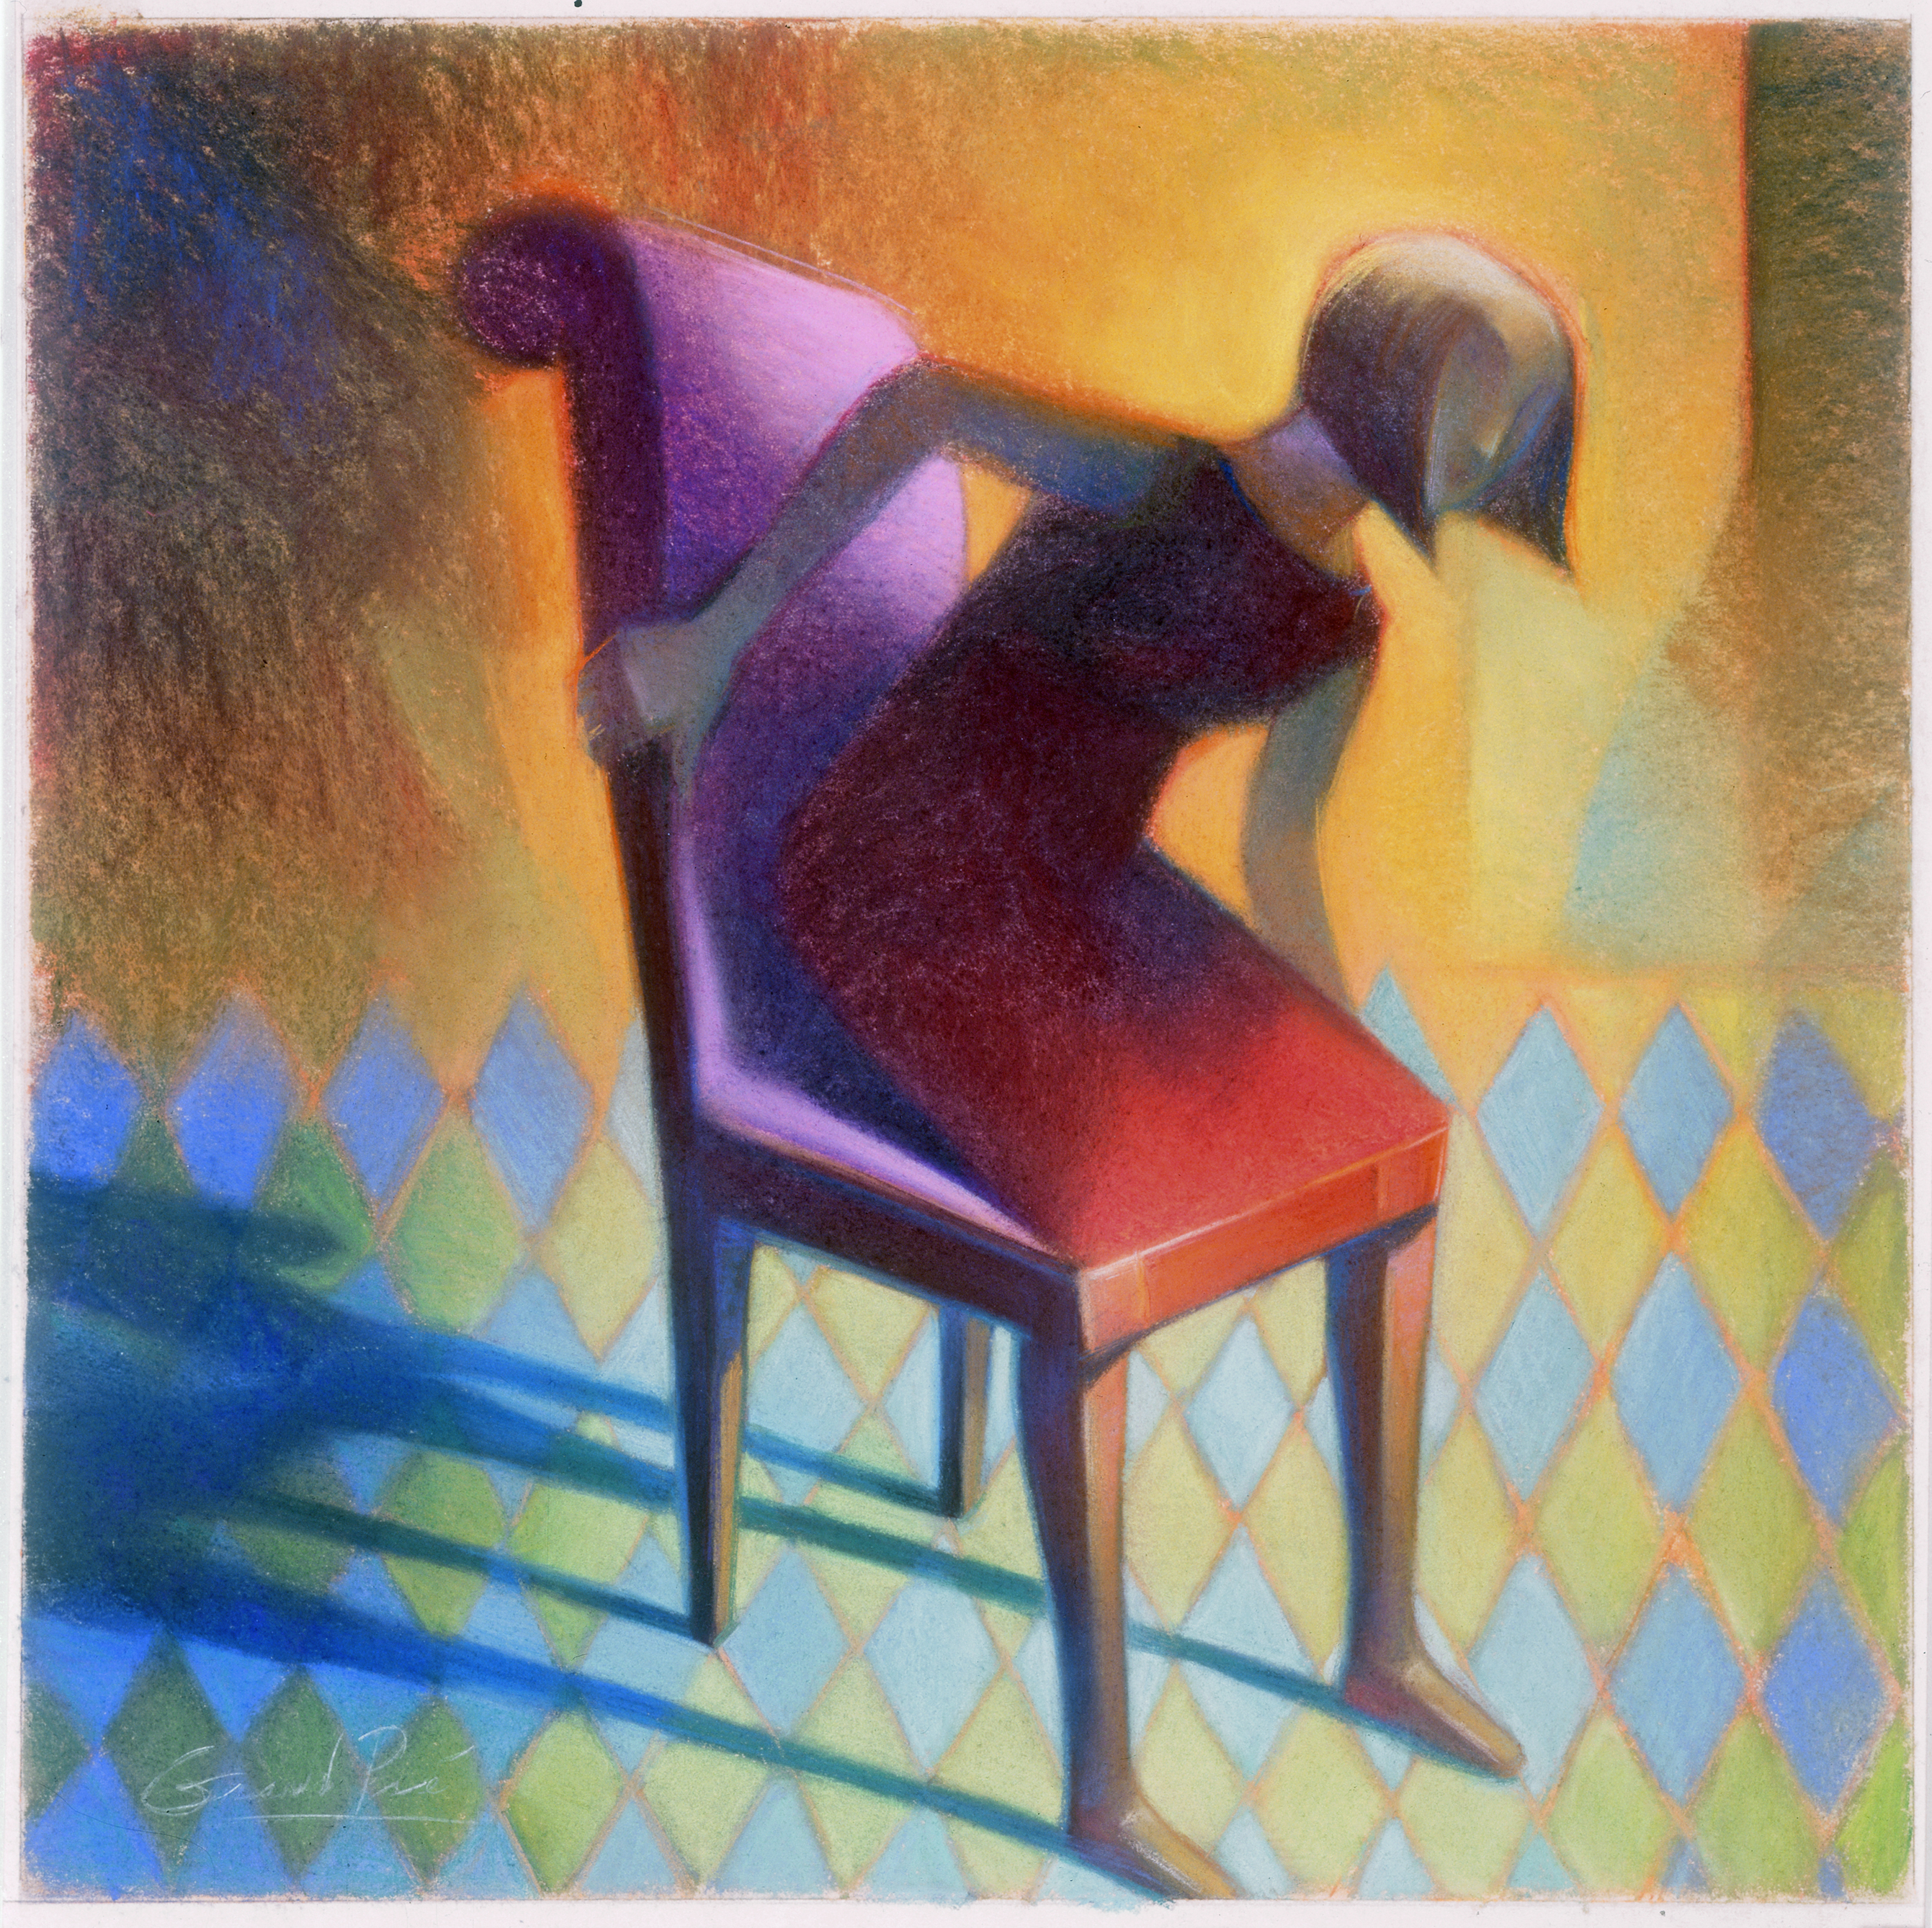 WOMAN ON A CHAIR by  Mary Grandpre - Masterpiece Online